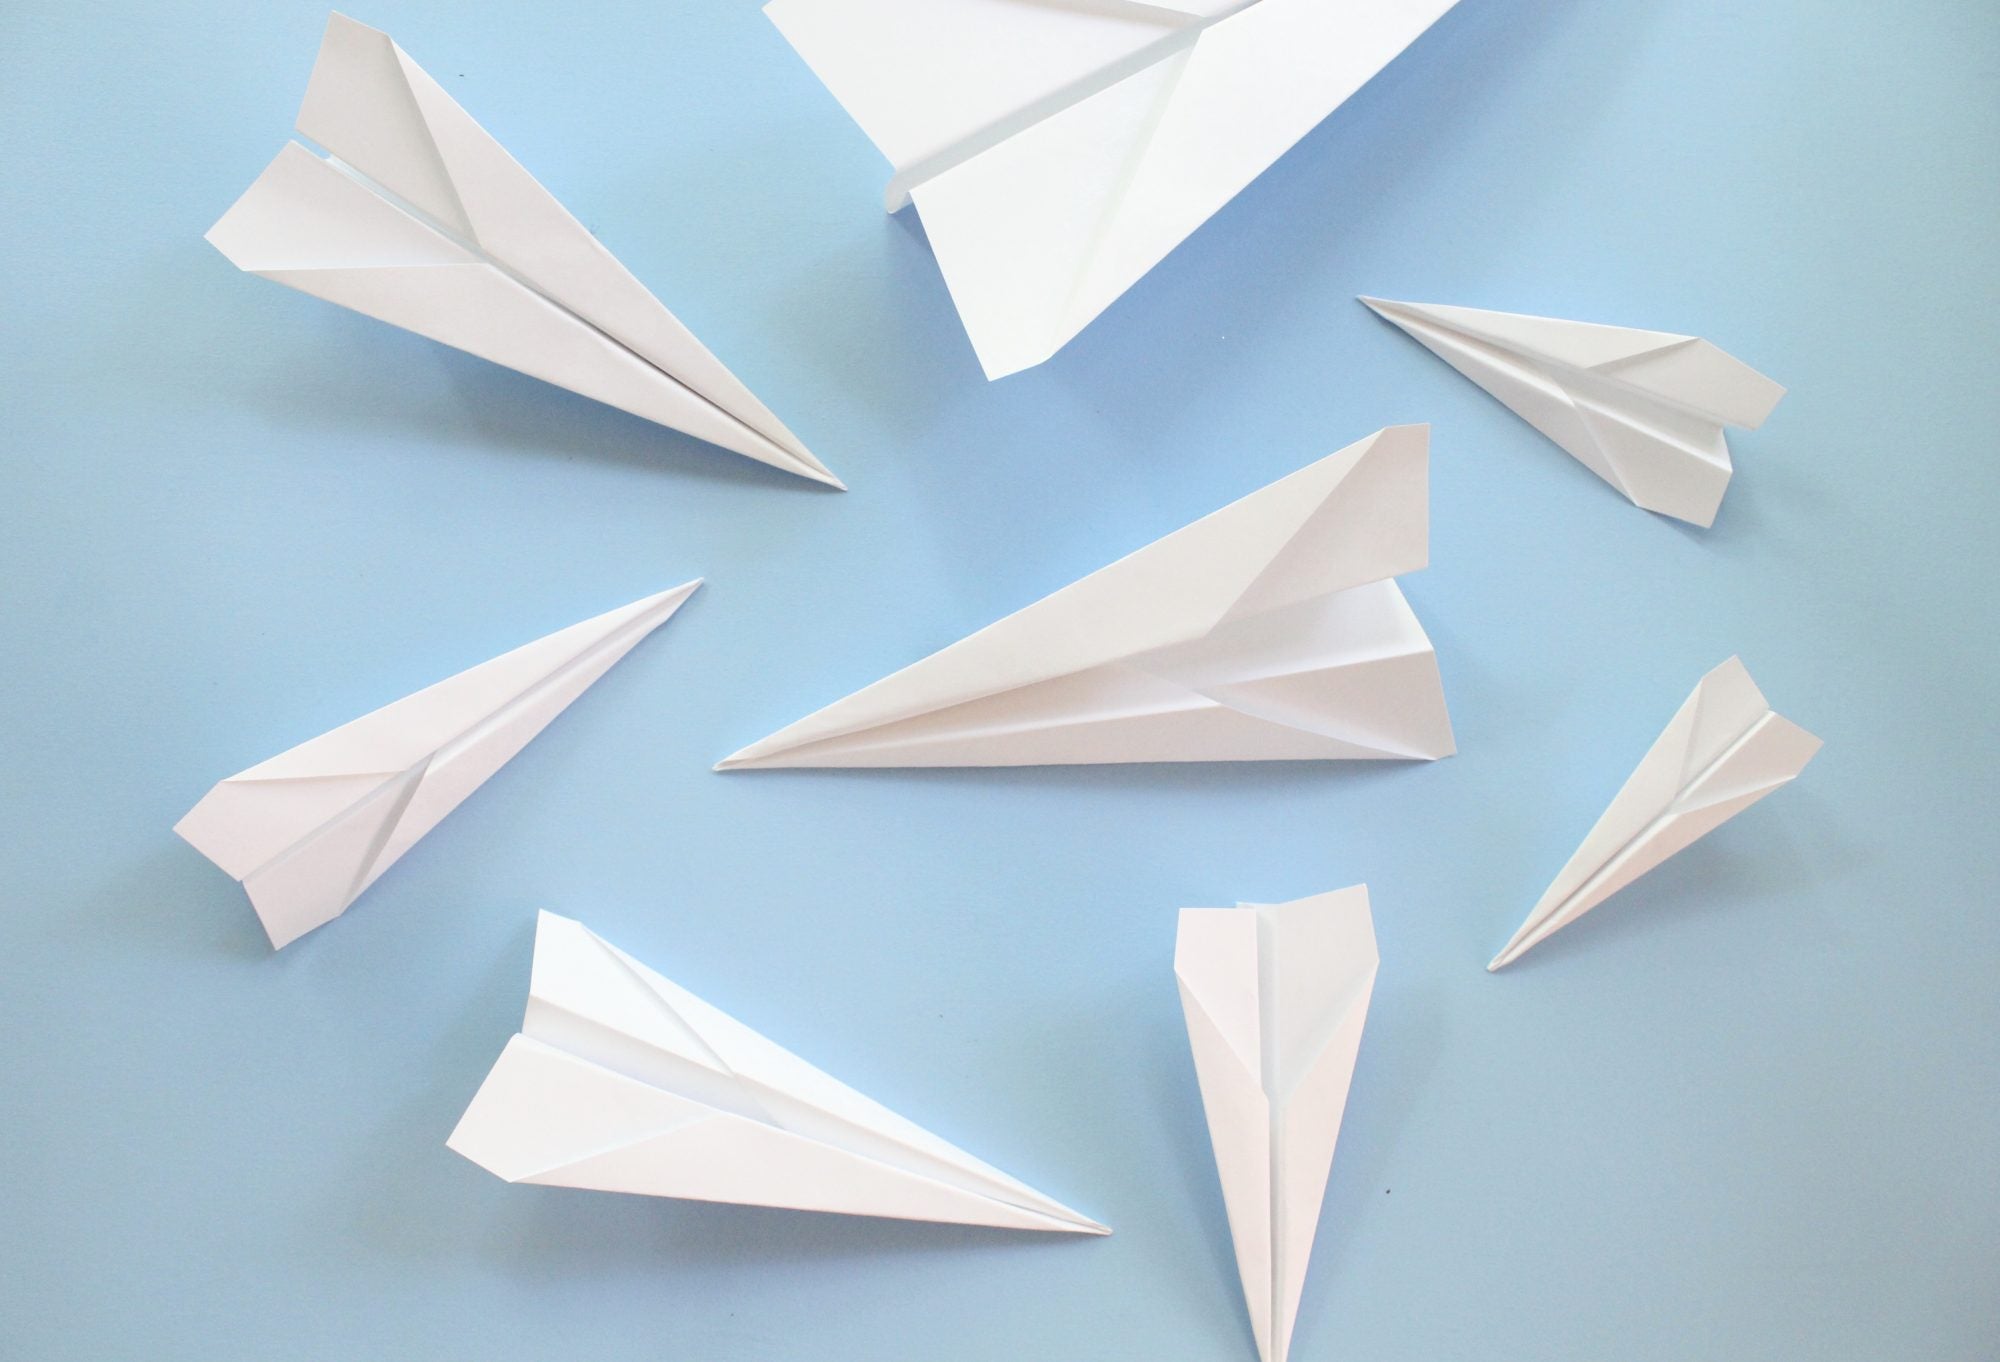 How to make a paper airplane | POWERUP for kids